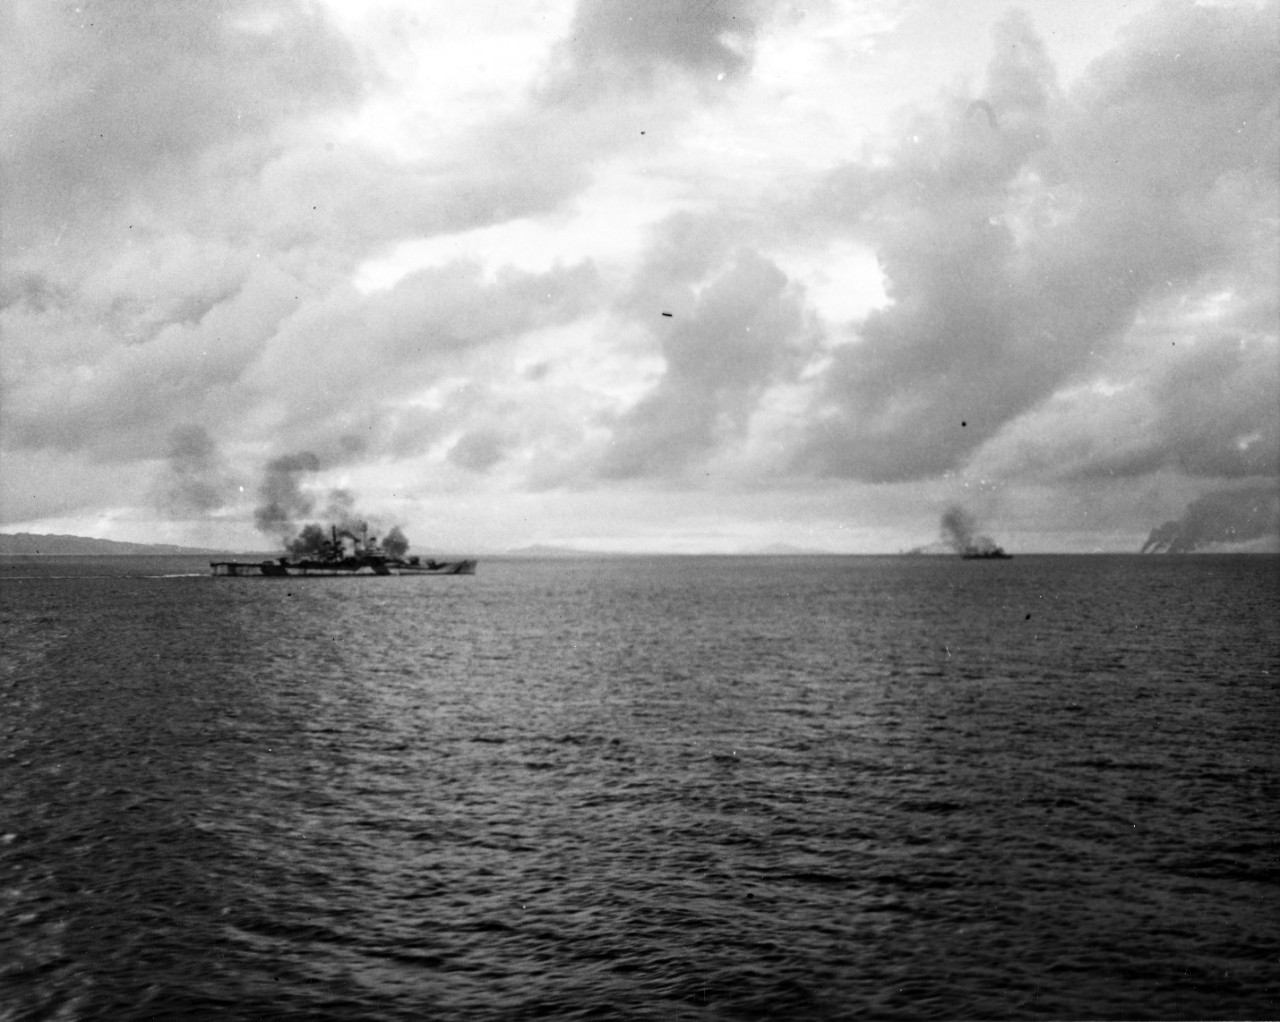 "Enemy DD under fire with burning enemy ships in background"